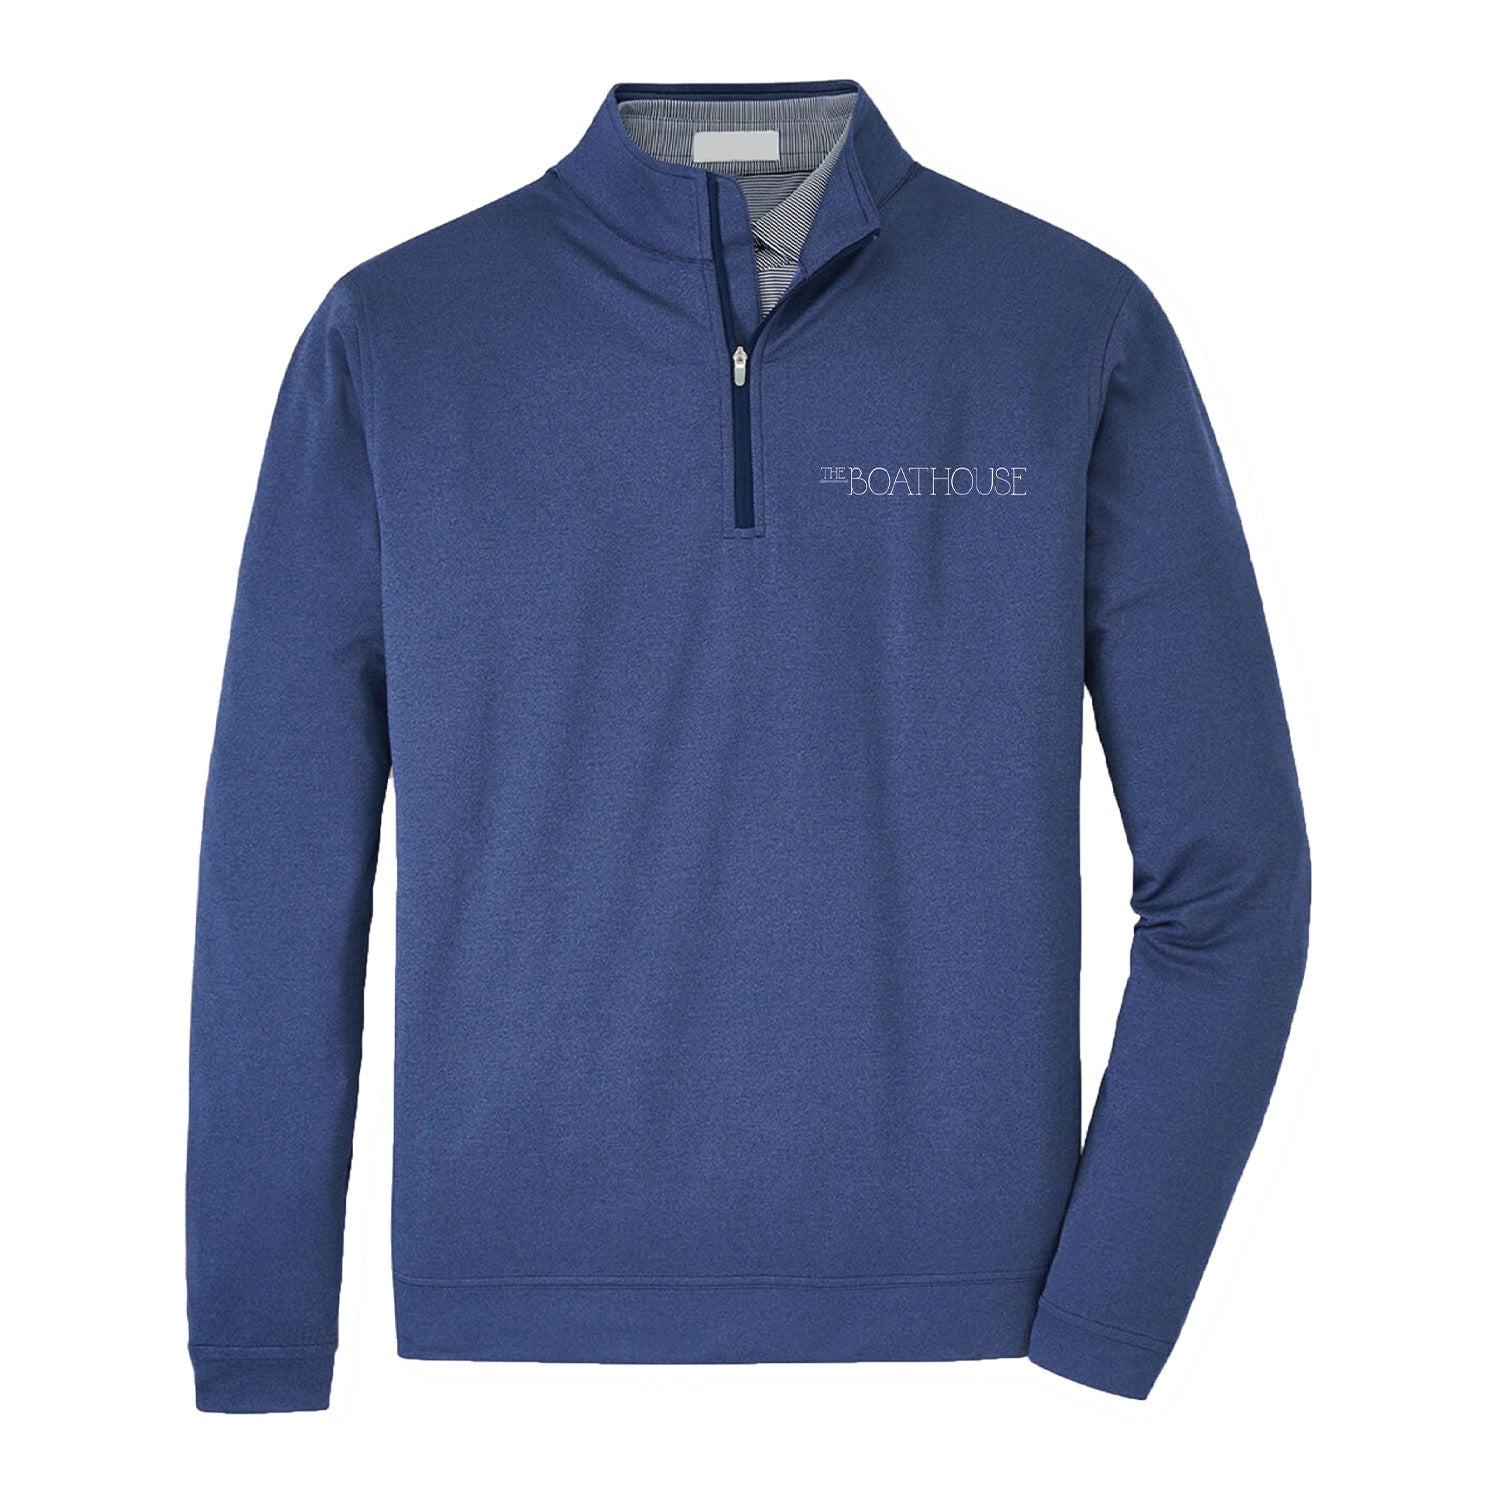 Peter Millar Central Park Boathouse Navy Quarter-Zip Pullover - Front View